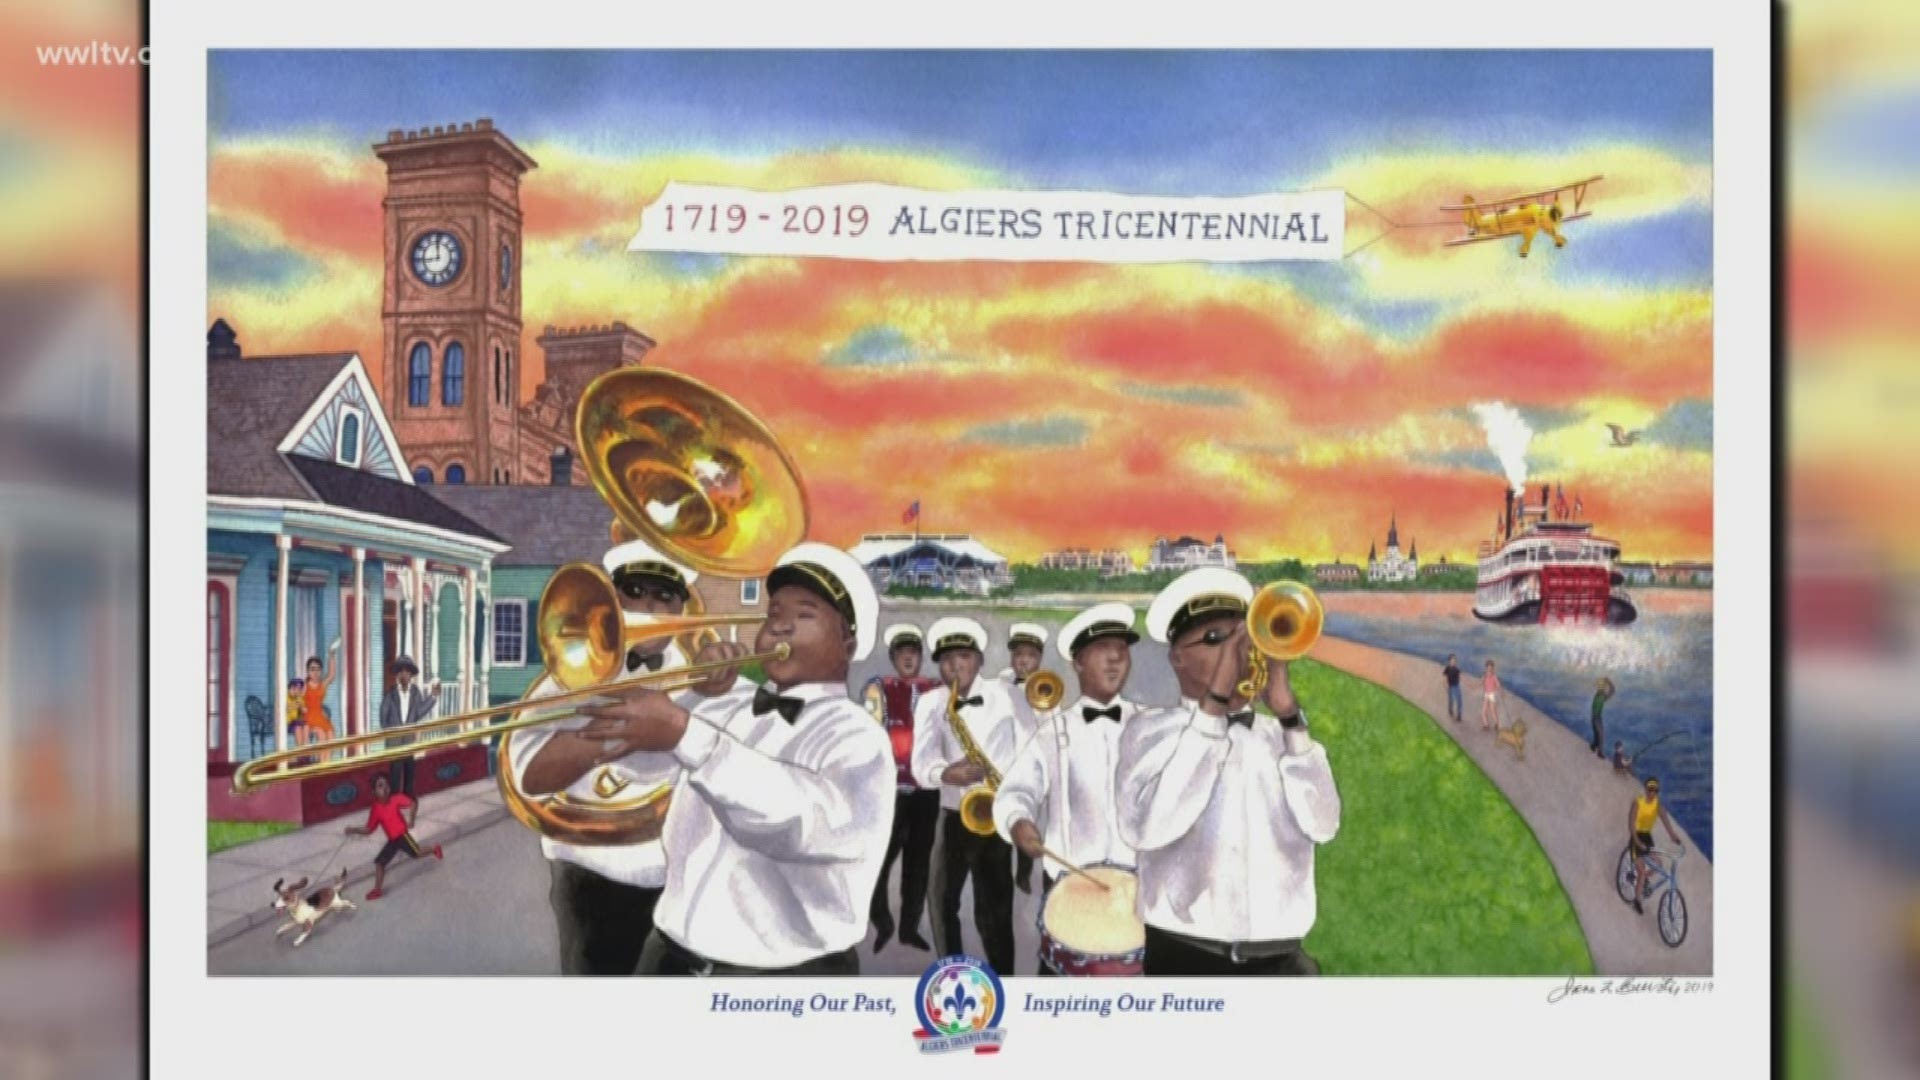 Linetta Gilbert gives us history on Algiers and information about Algiers Tricentennial & New Year's Eve Bash. Joining her is the Algiers Brass Band.